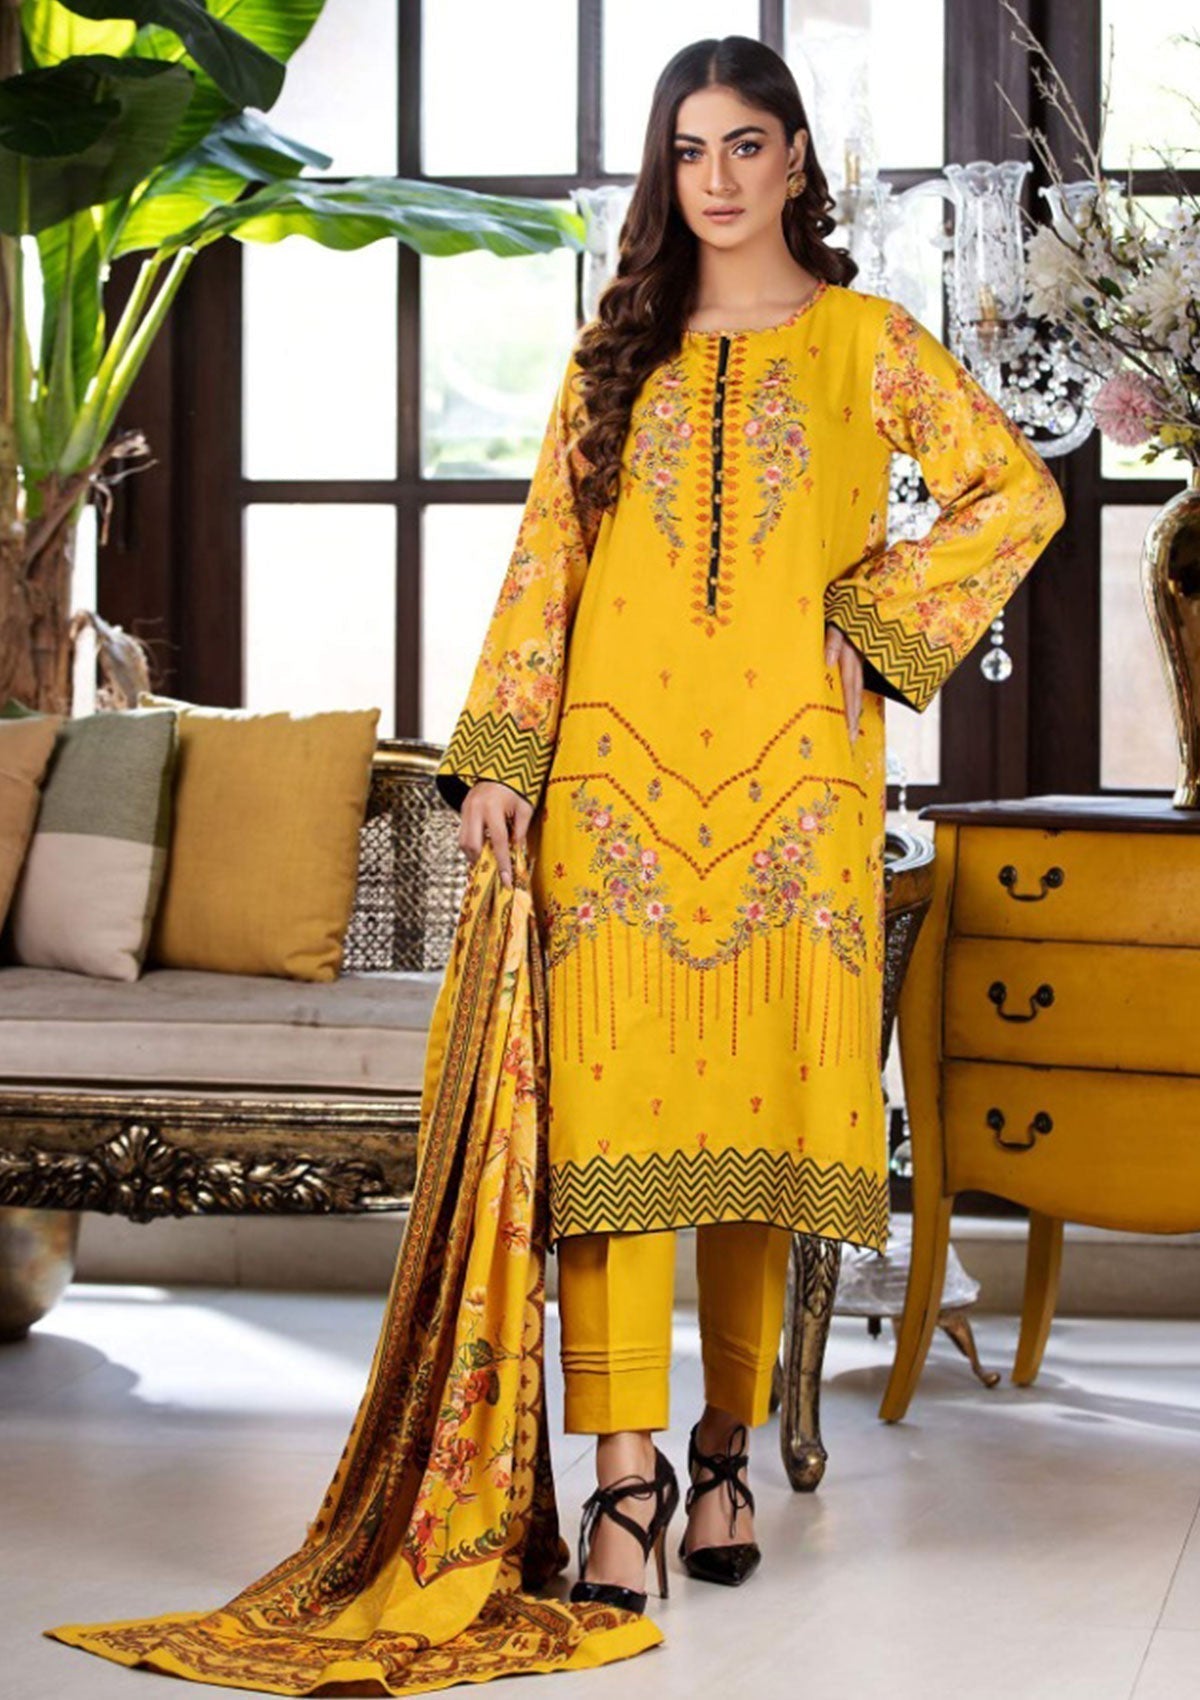 Winter Collection - Noor Jahan - Mina Hassan - D#2 available at Saleem Fabrics Traditions